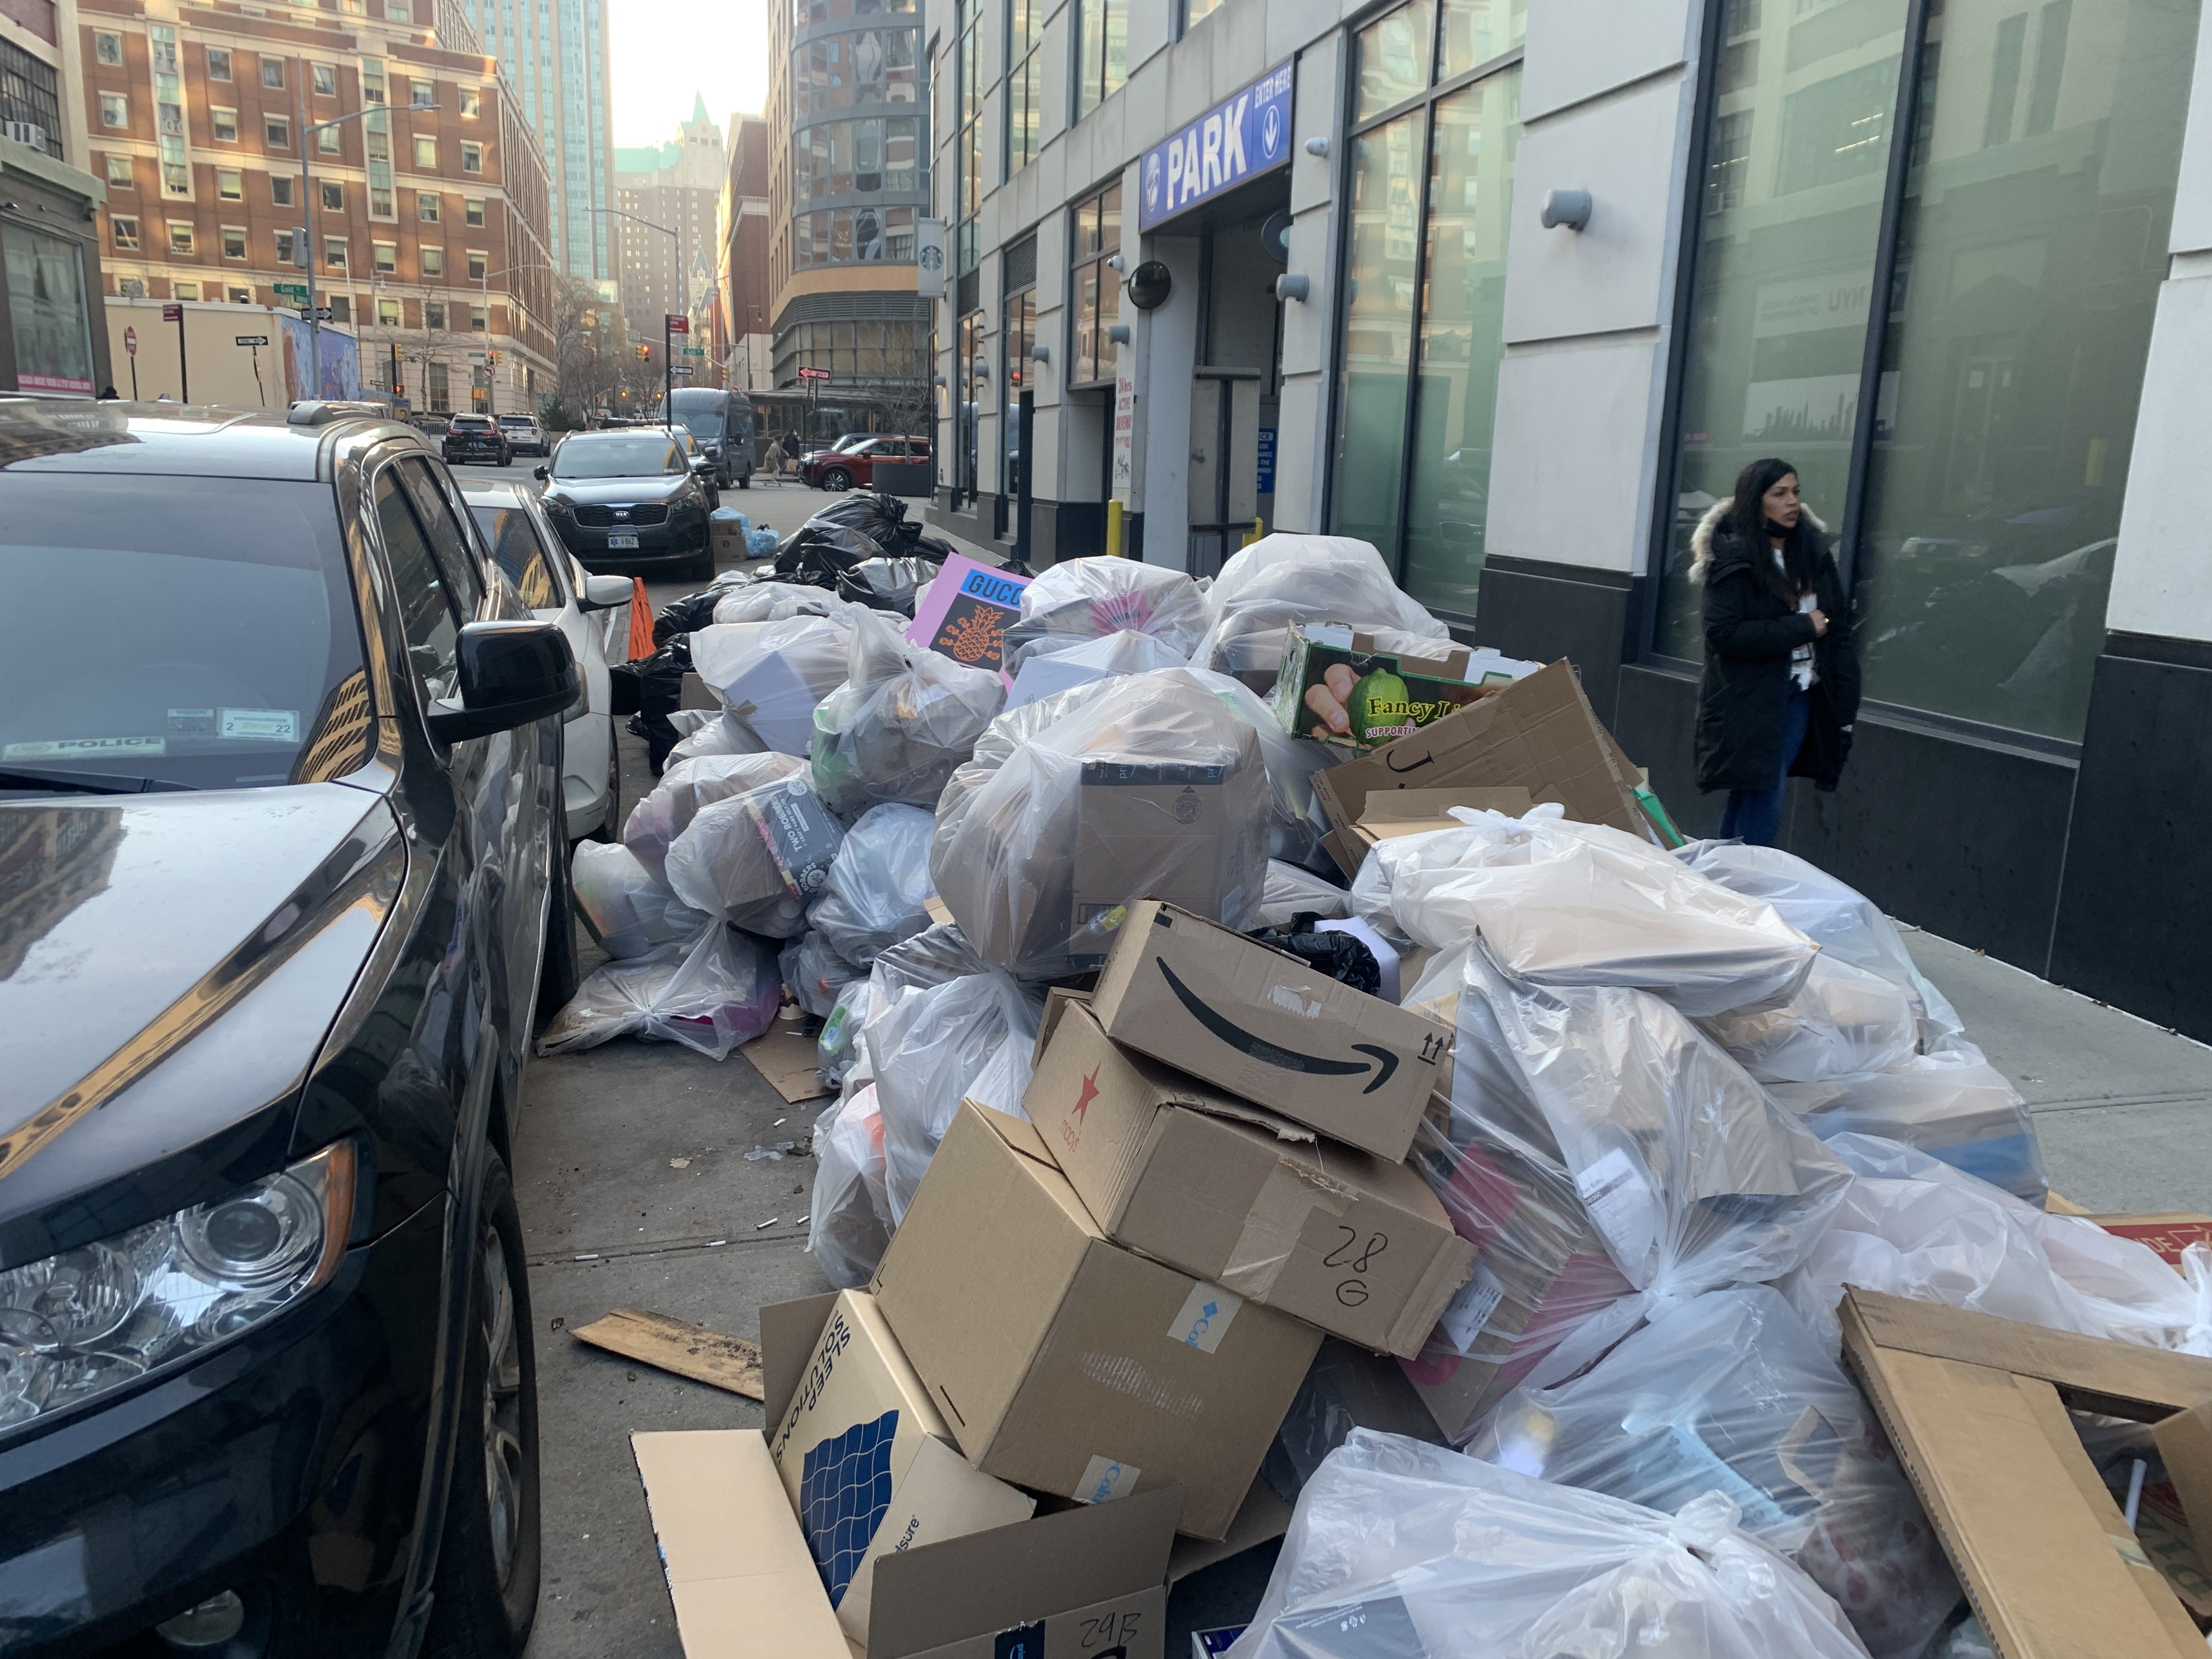 Parking in New York City Really Is Worse Than Ever - The New York